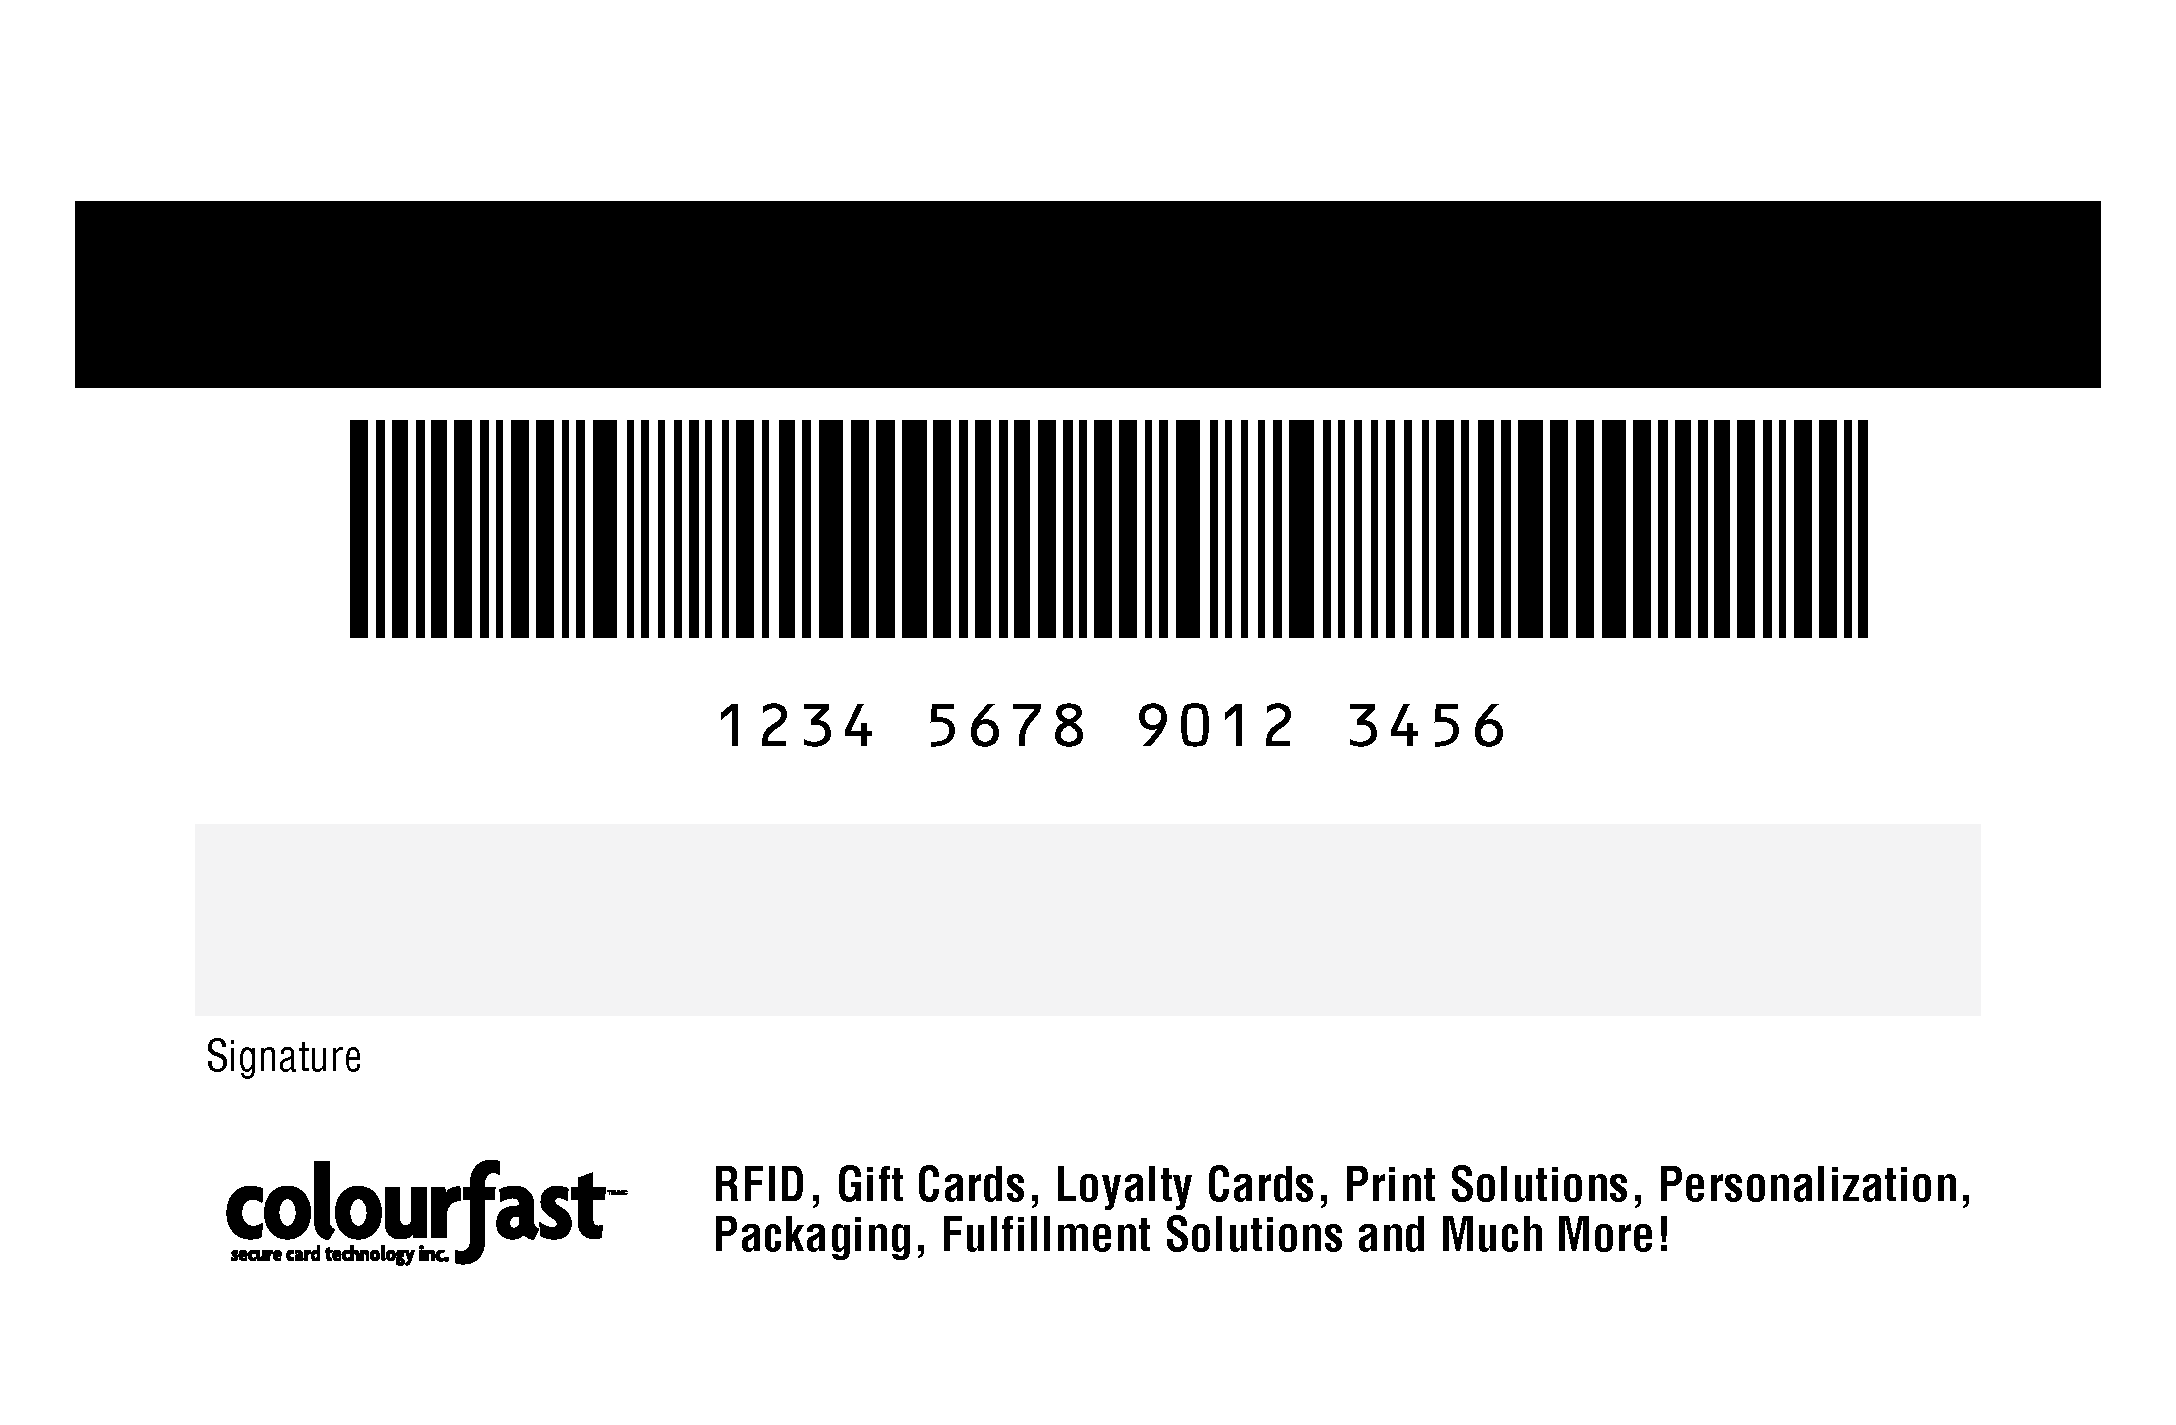 Image of Magnetic Stripe, Variable Barcode, Human-readable number, Signature Panel